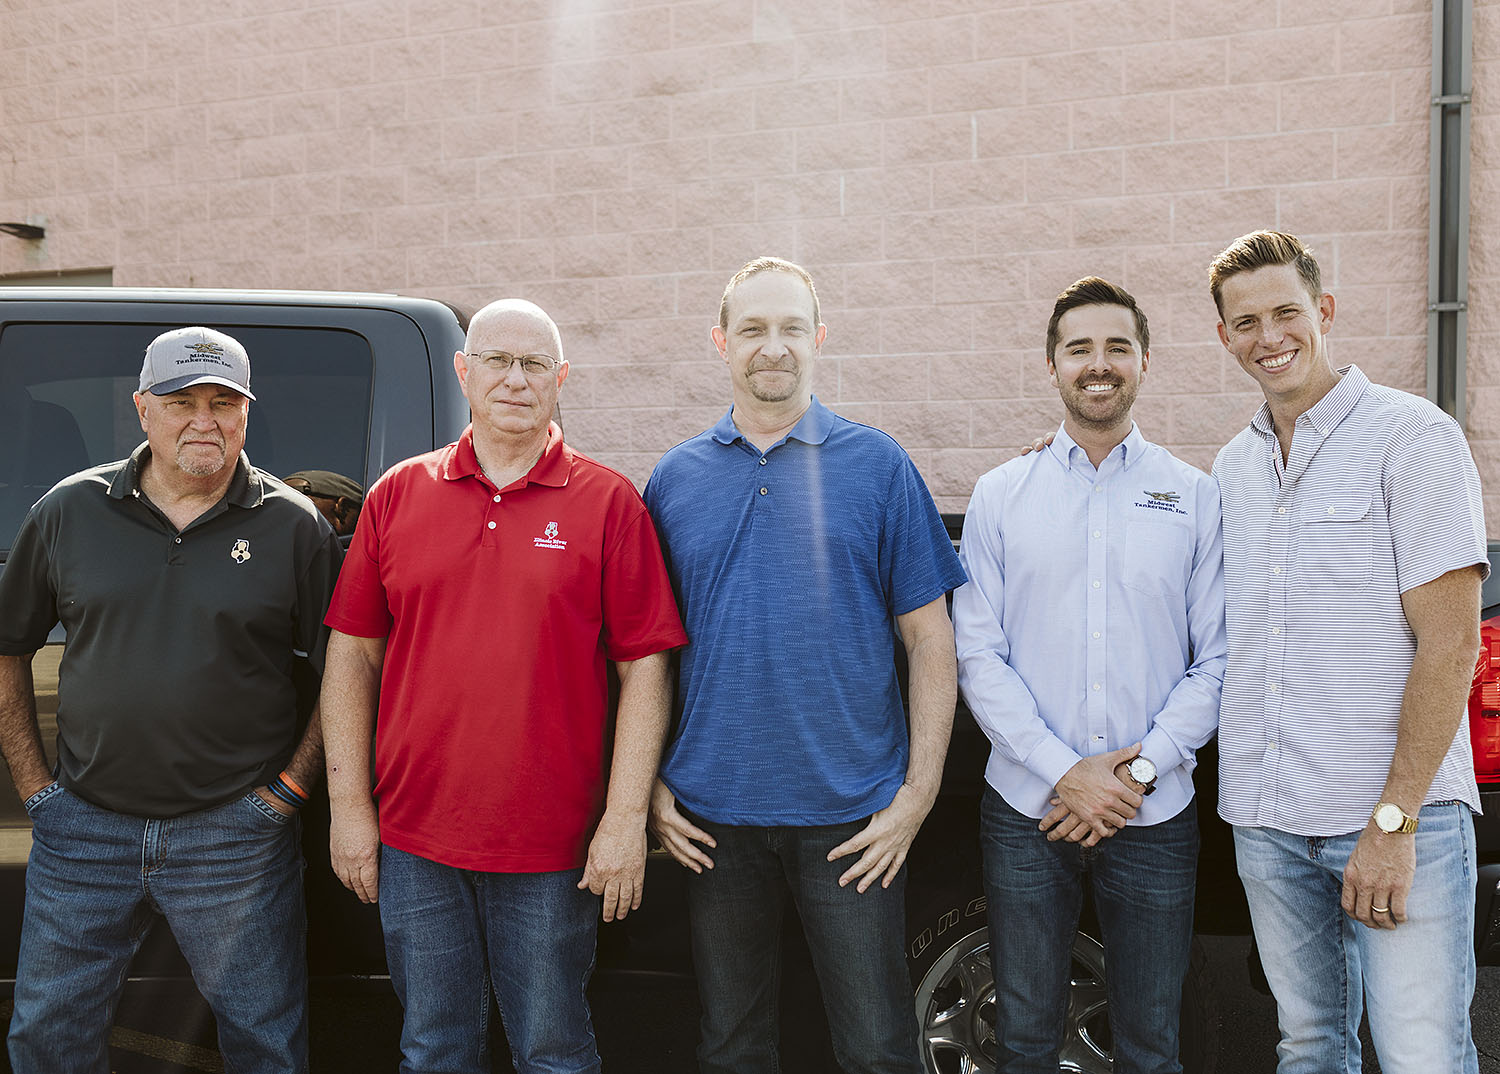 James Loughlin, new CEO of Midwest Tankermen, Inc., with the company’s dispatch/management team. From left, Chad Lacy, Chuck Colognesi, George Branner, Kevin Molloy and Loughlin. (Photo courtesy of Midwest Tankermen Inc.)